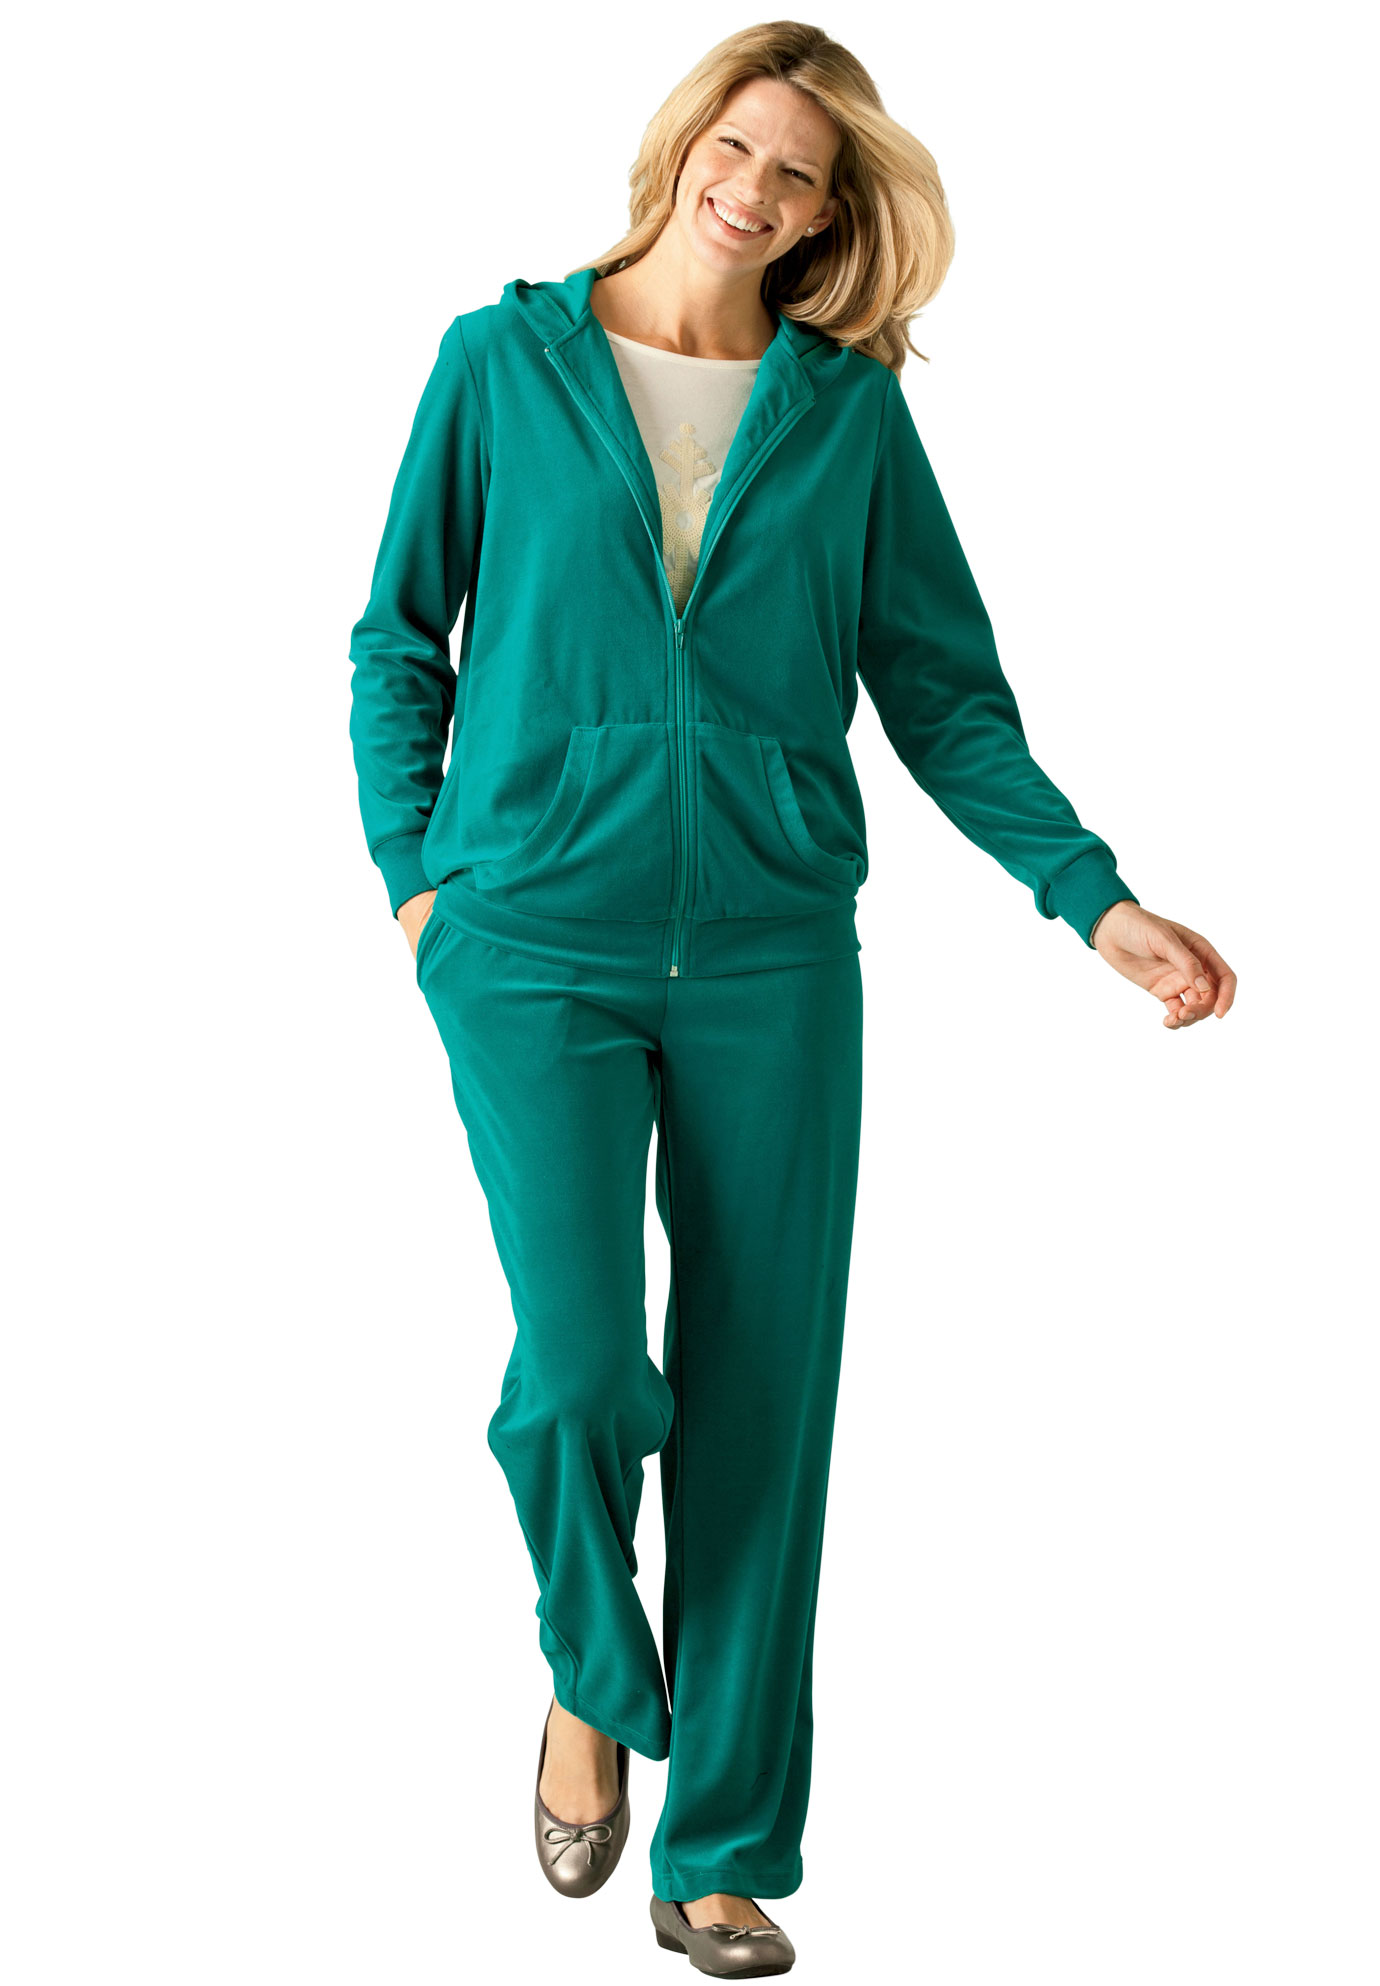 Woman Within Women's Plus Size 2-Piece Velour Hoodie Set Sweatsuit - image 4 of 5